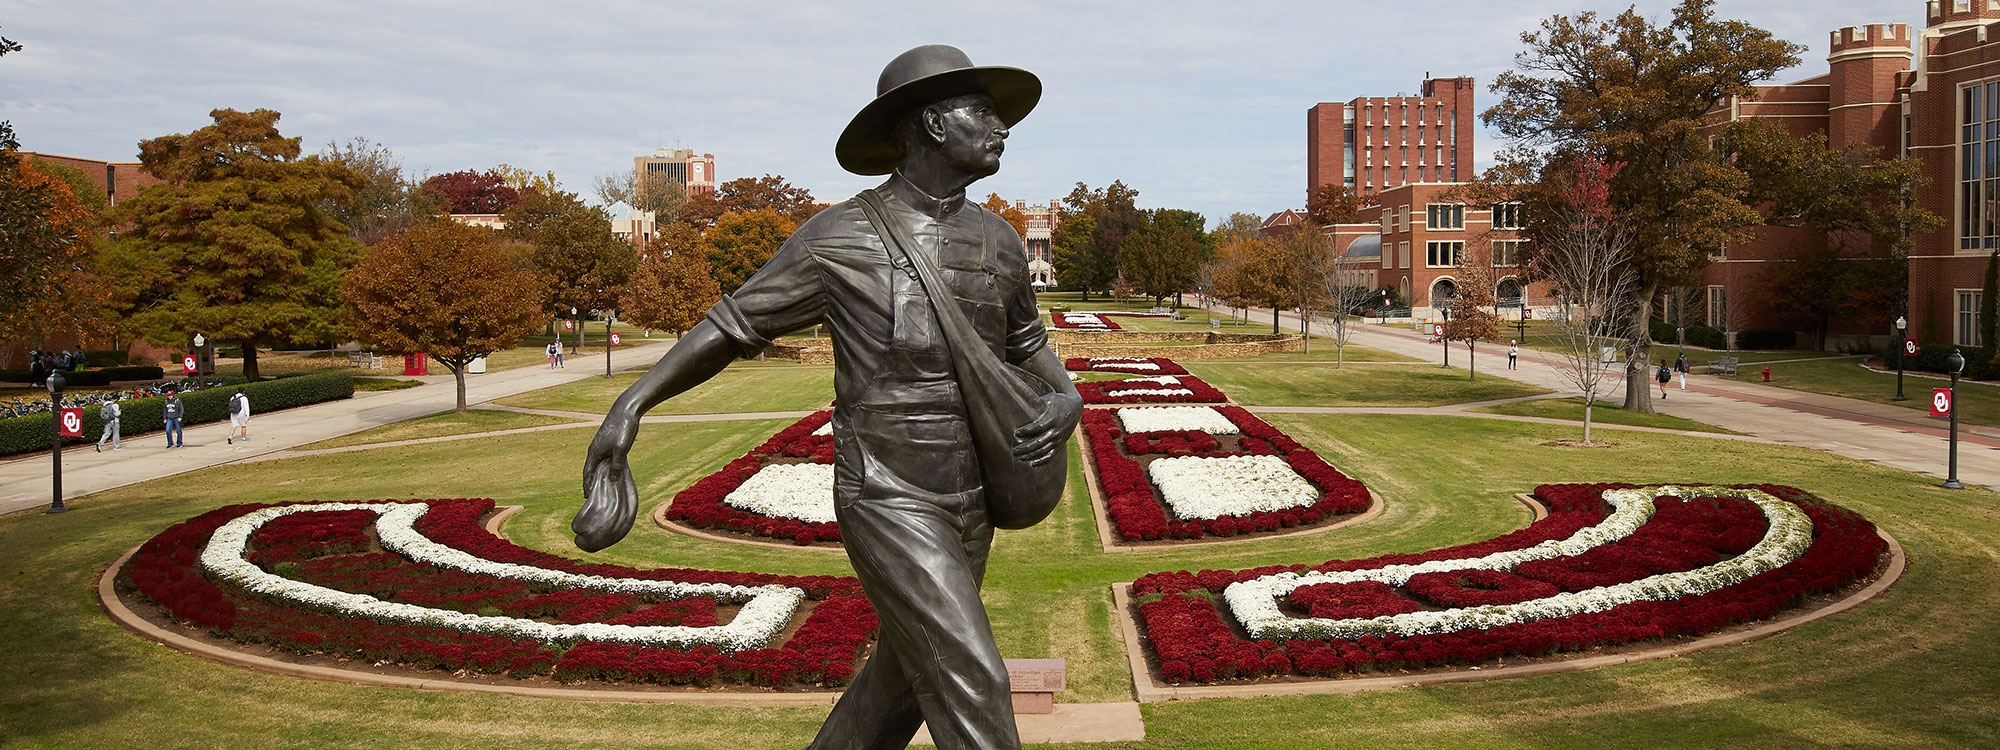 The seed sower statue framed by the grassy oval planted with crimson and white mums in geometric patterns.